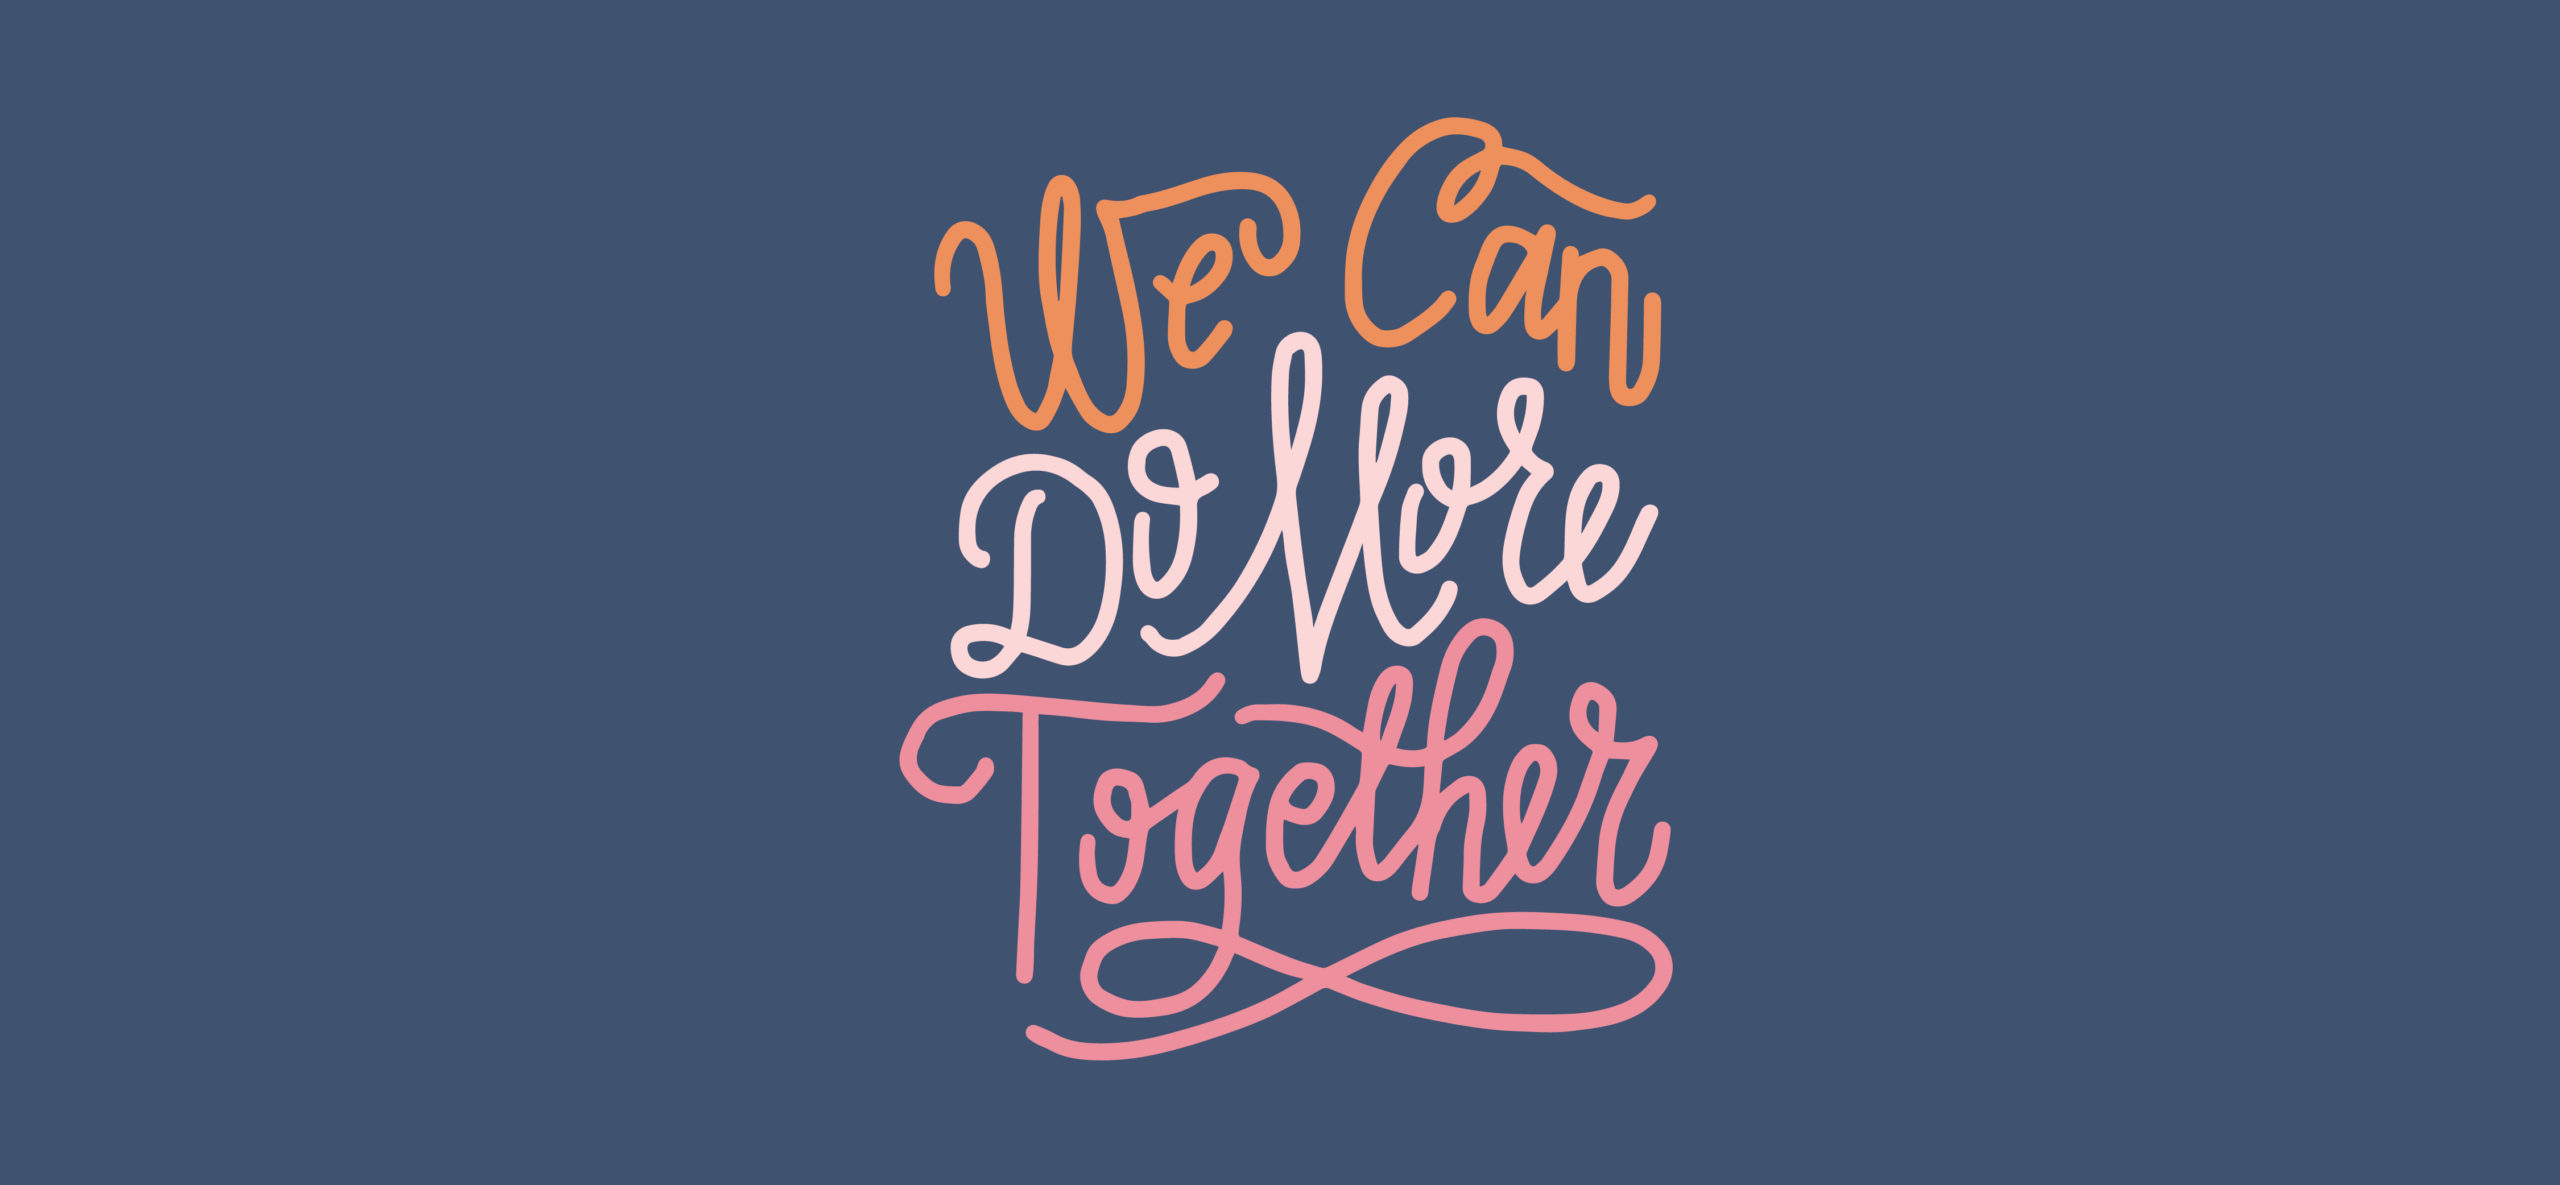 We can do more together logo